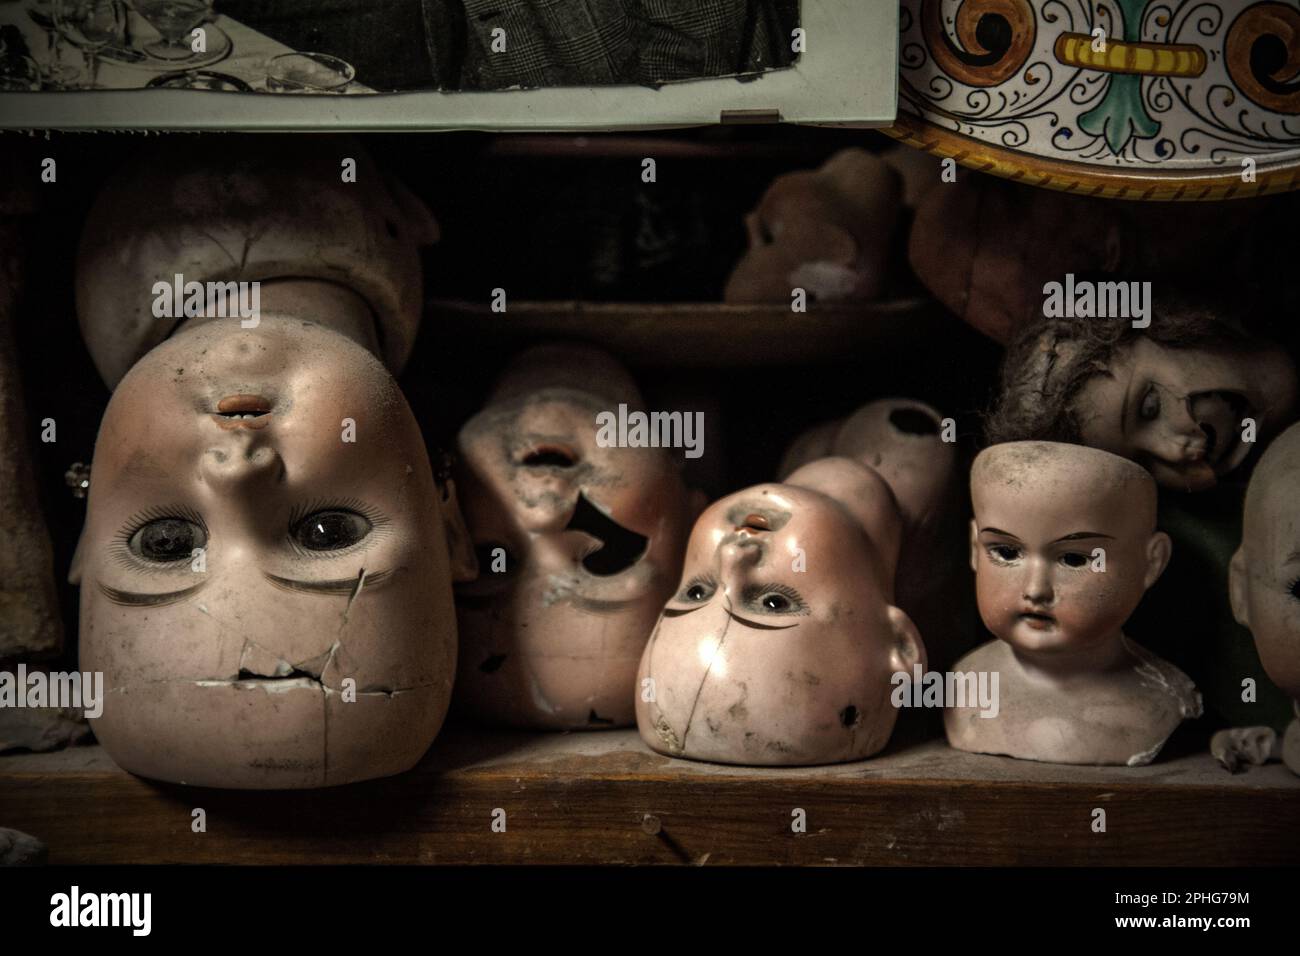 Broken heads of antique dolls line the shelves at the Squatriti family's workshop in Rome, which is also known as the city's 'Doll Hospital'. Stock Photo